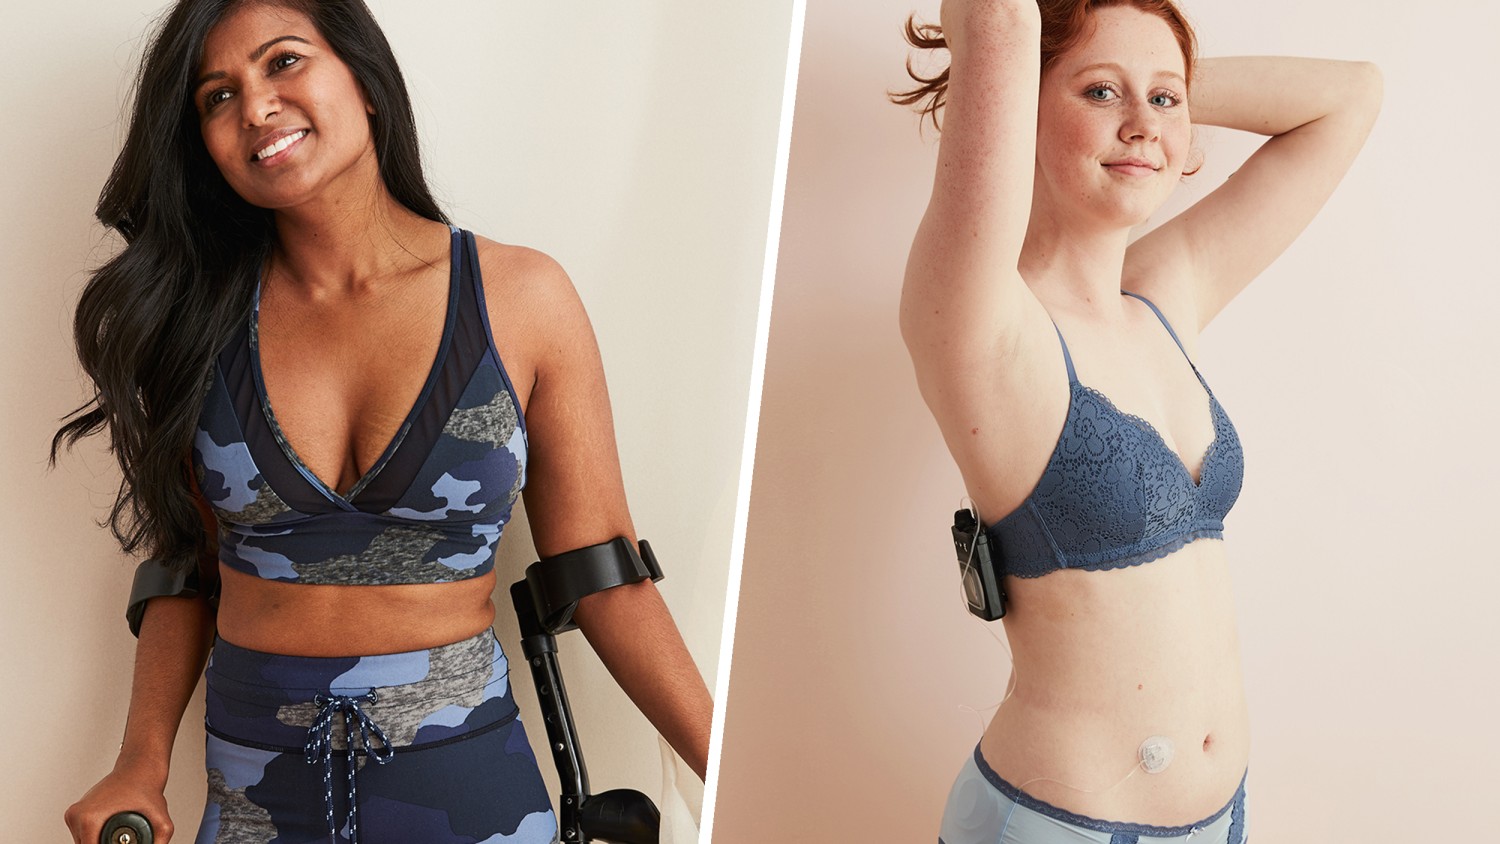 Aerie Celebrates Body Empowerment With Real Women